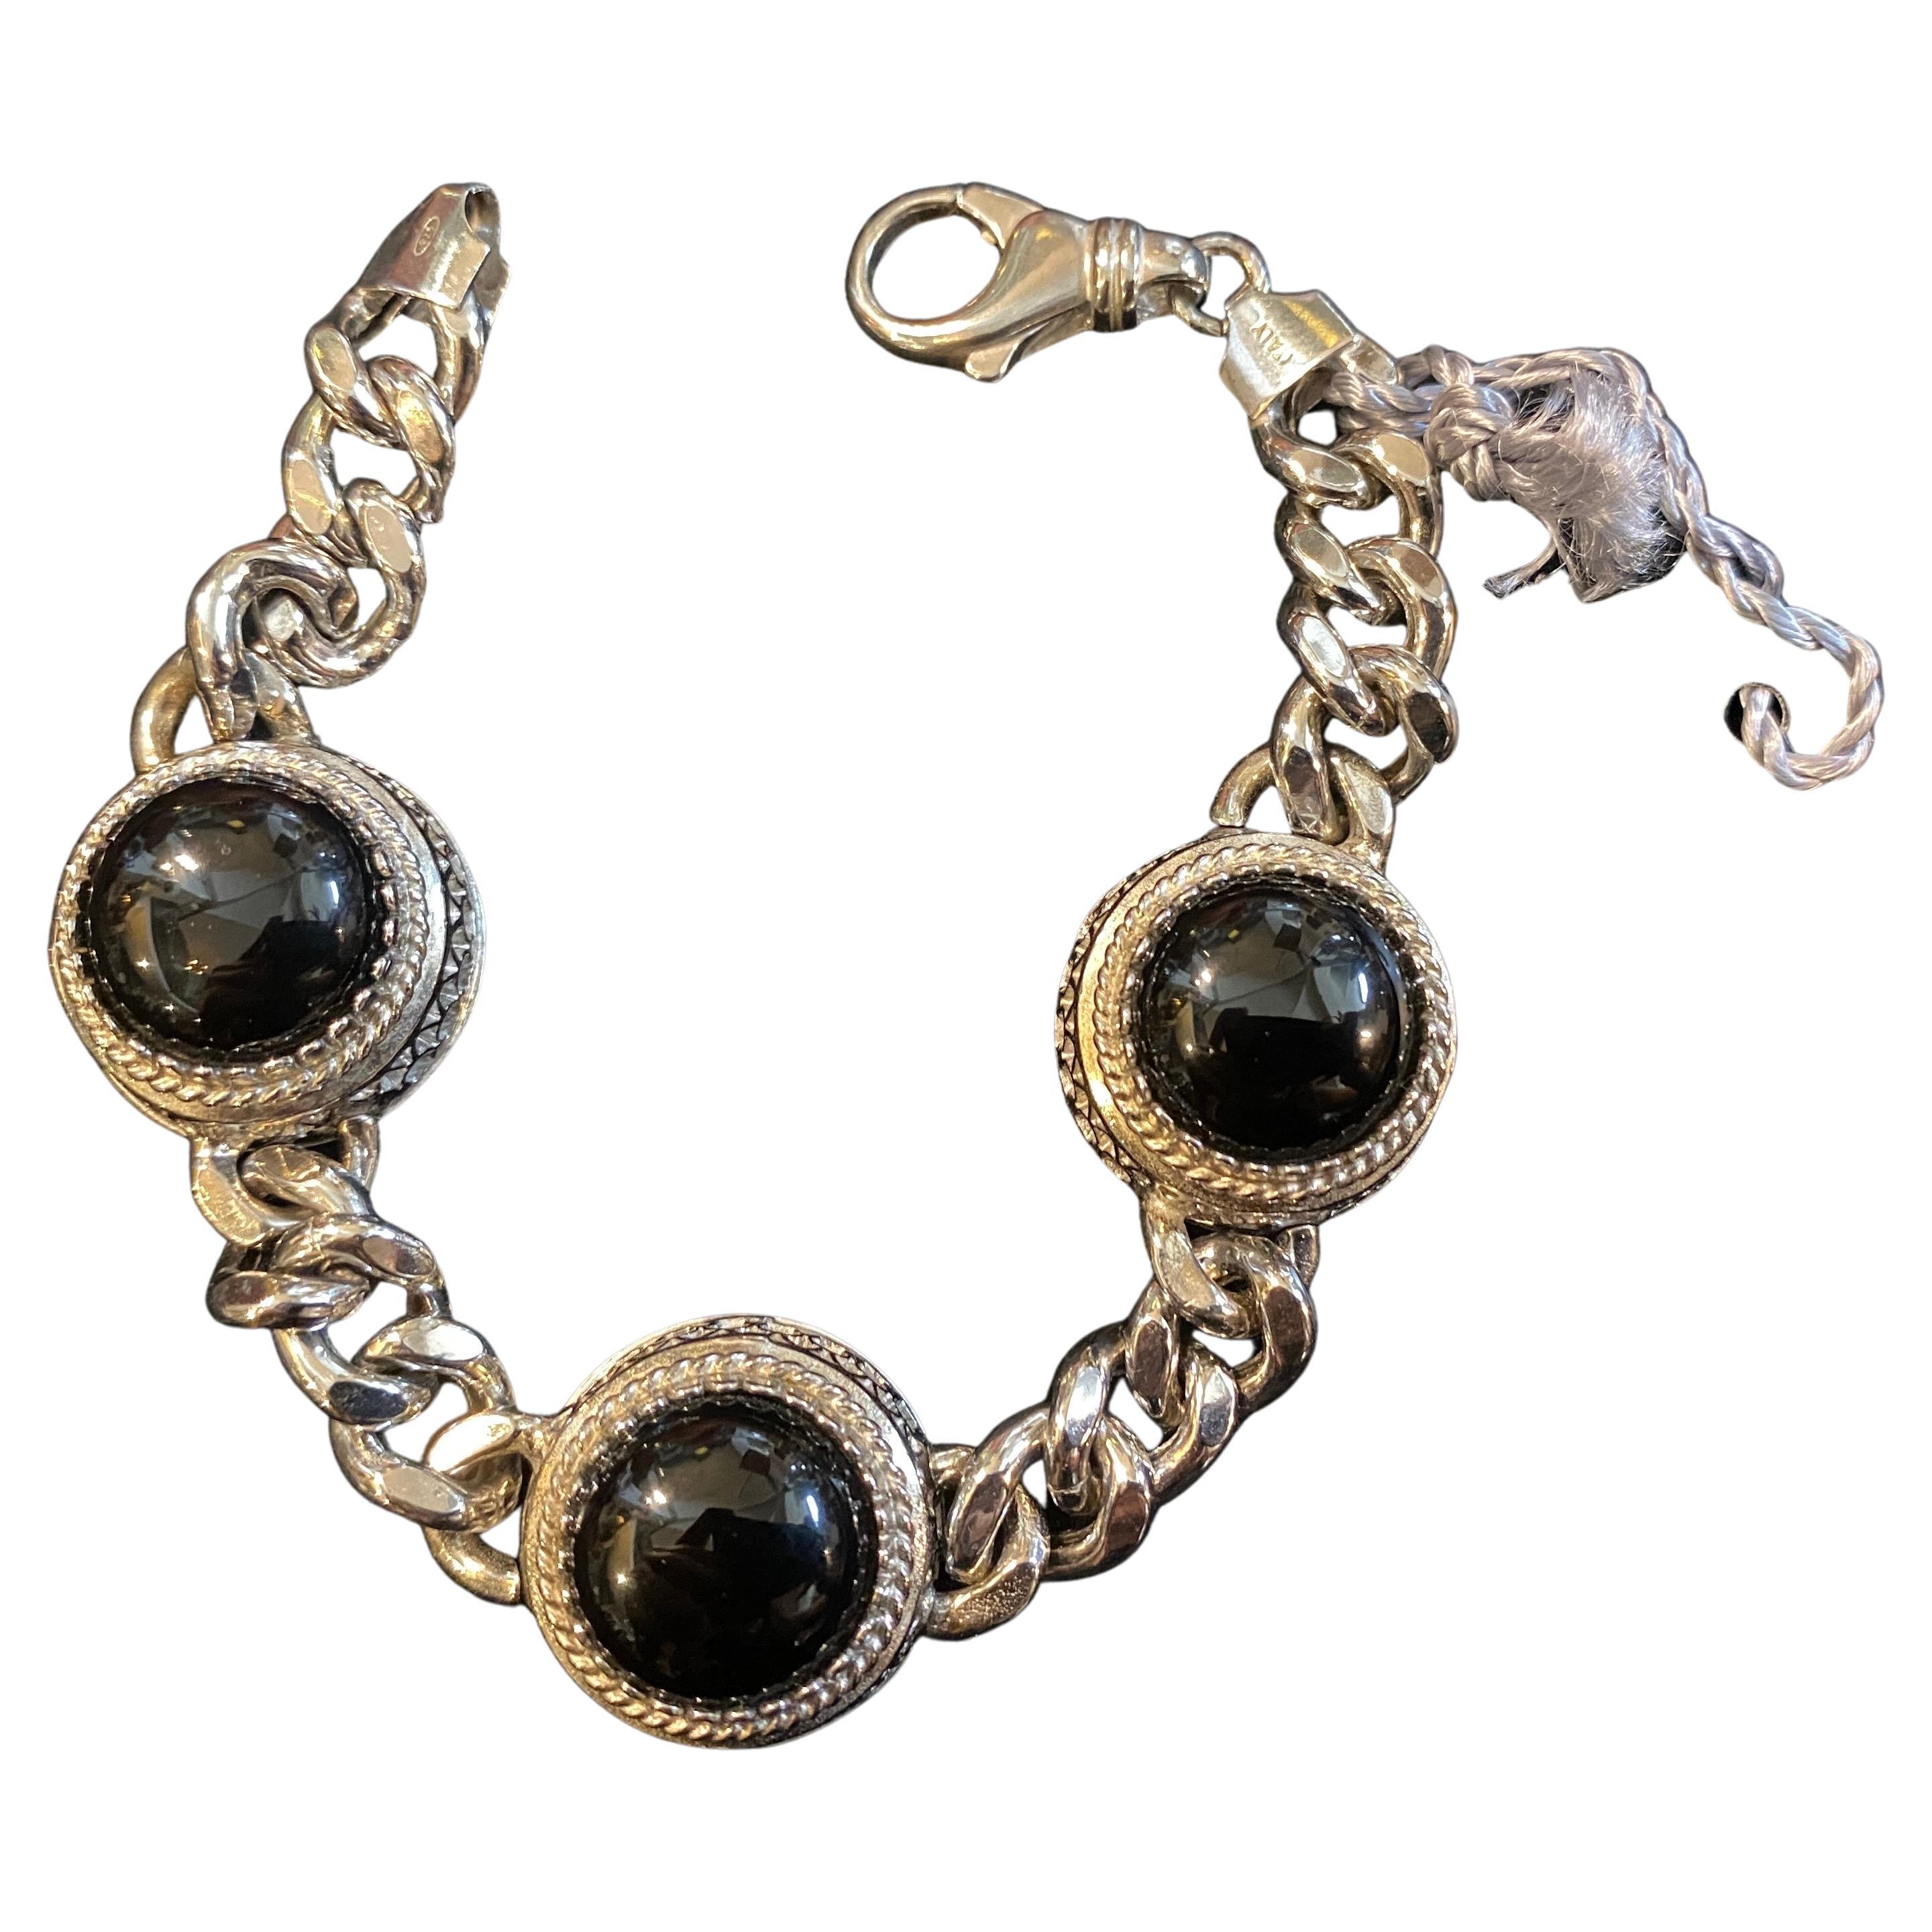 1990s Vintage Sterling Silver and Onyx Italian Chain Bracelet by Anomis